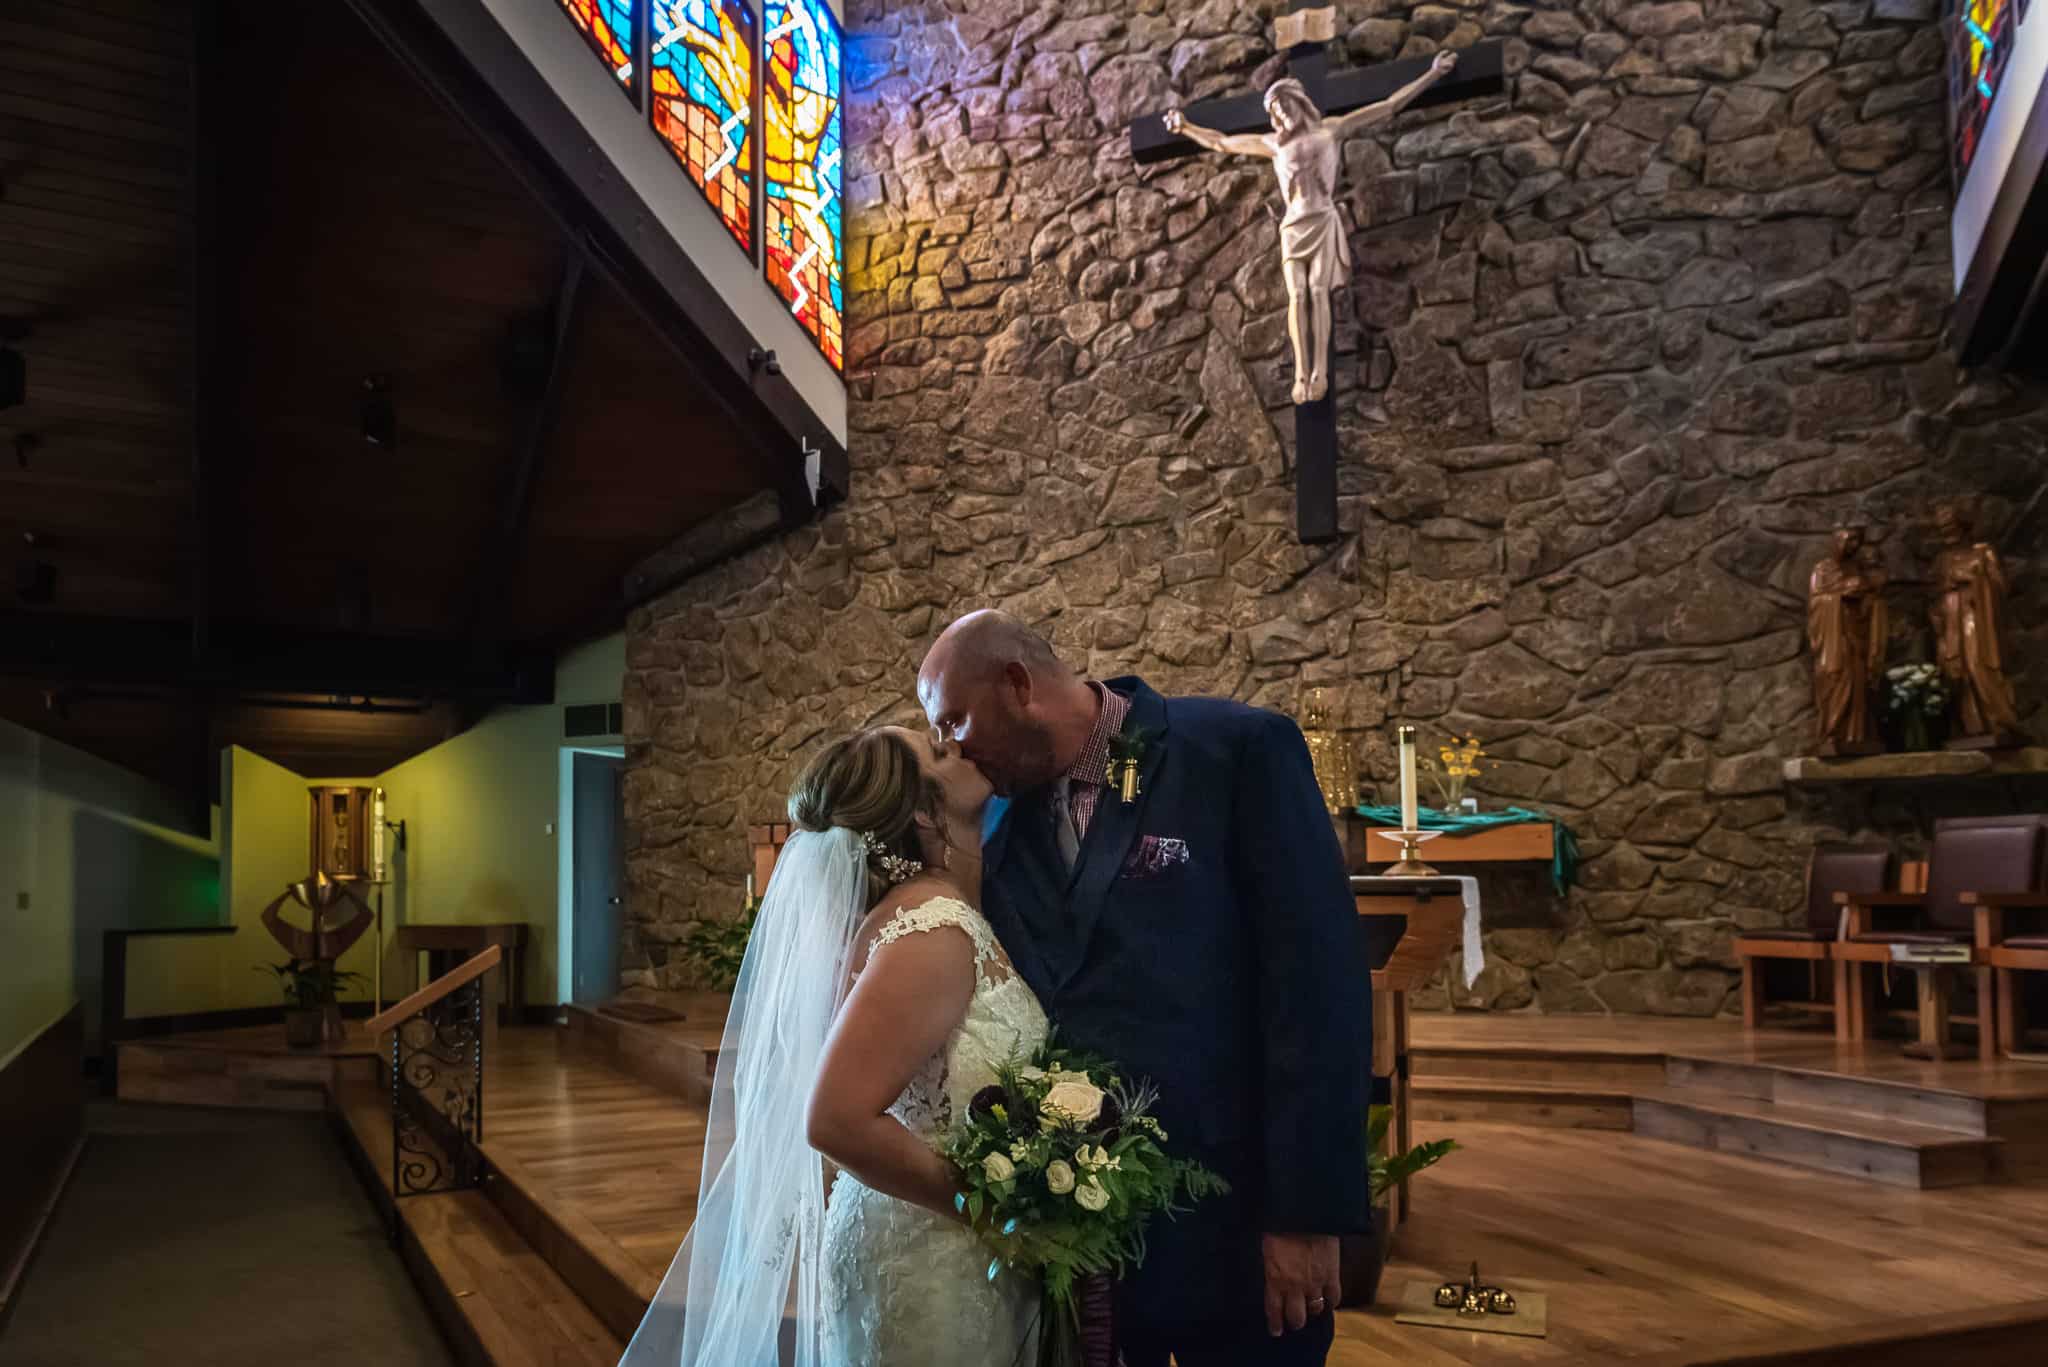 Natural light photo of a bride and groom sharing a kiss at the altar after their ceremony in a Catholic Church.